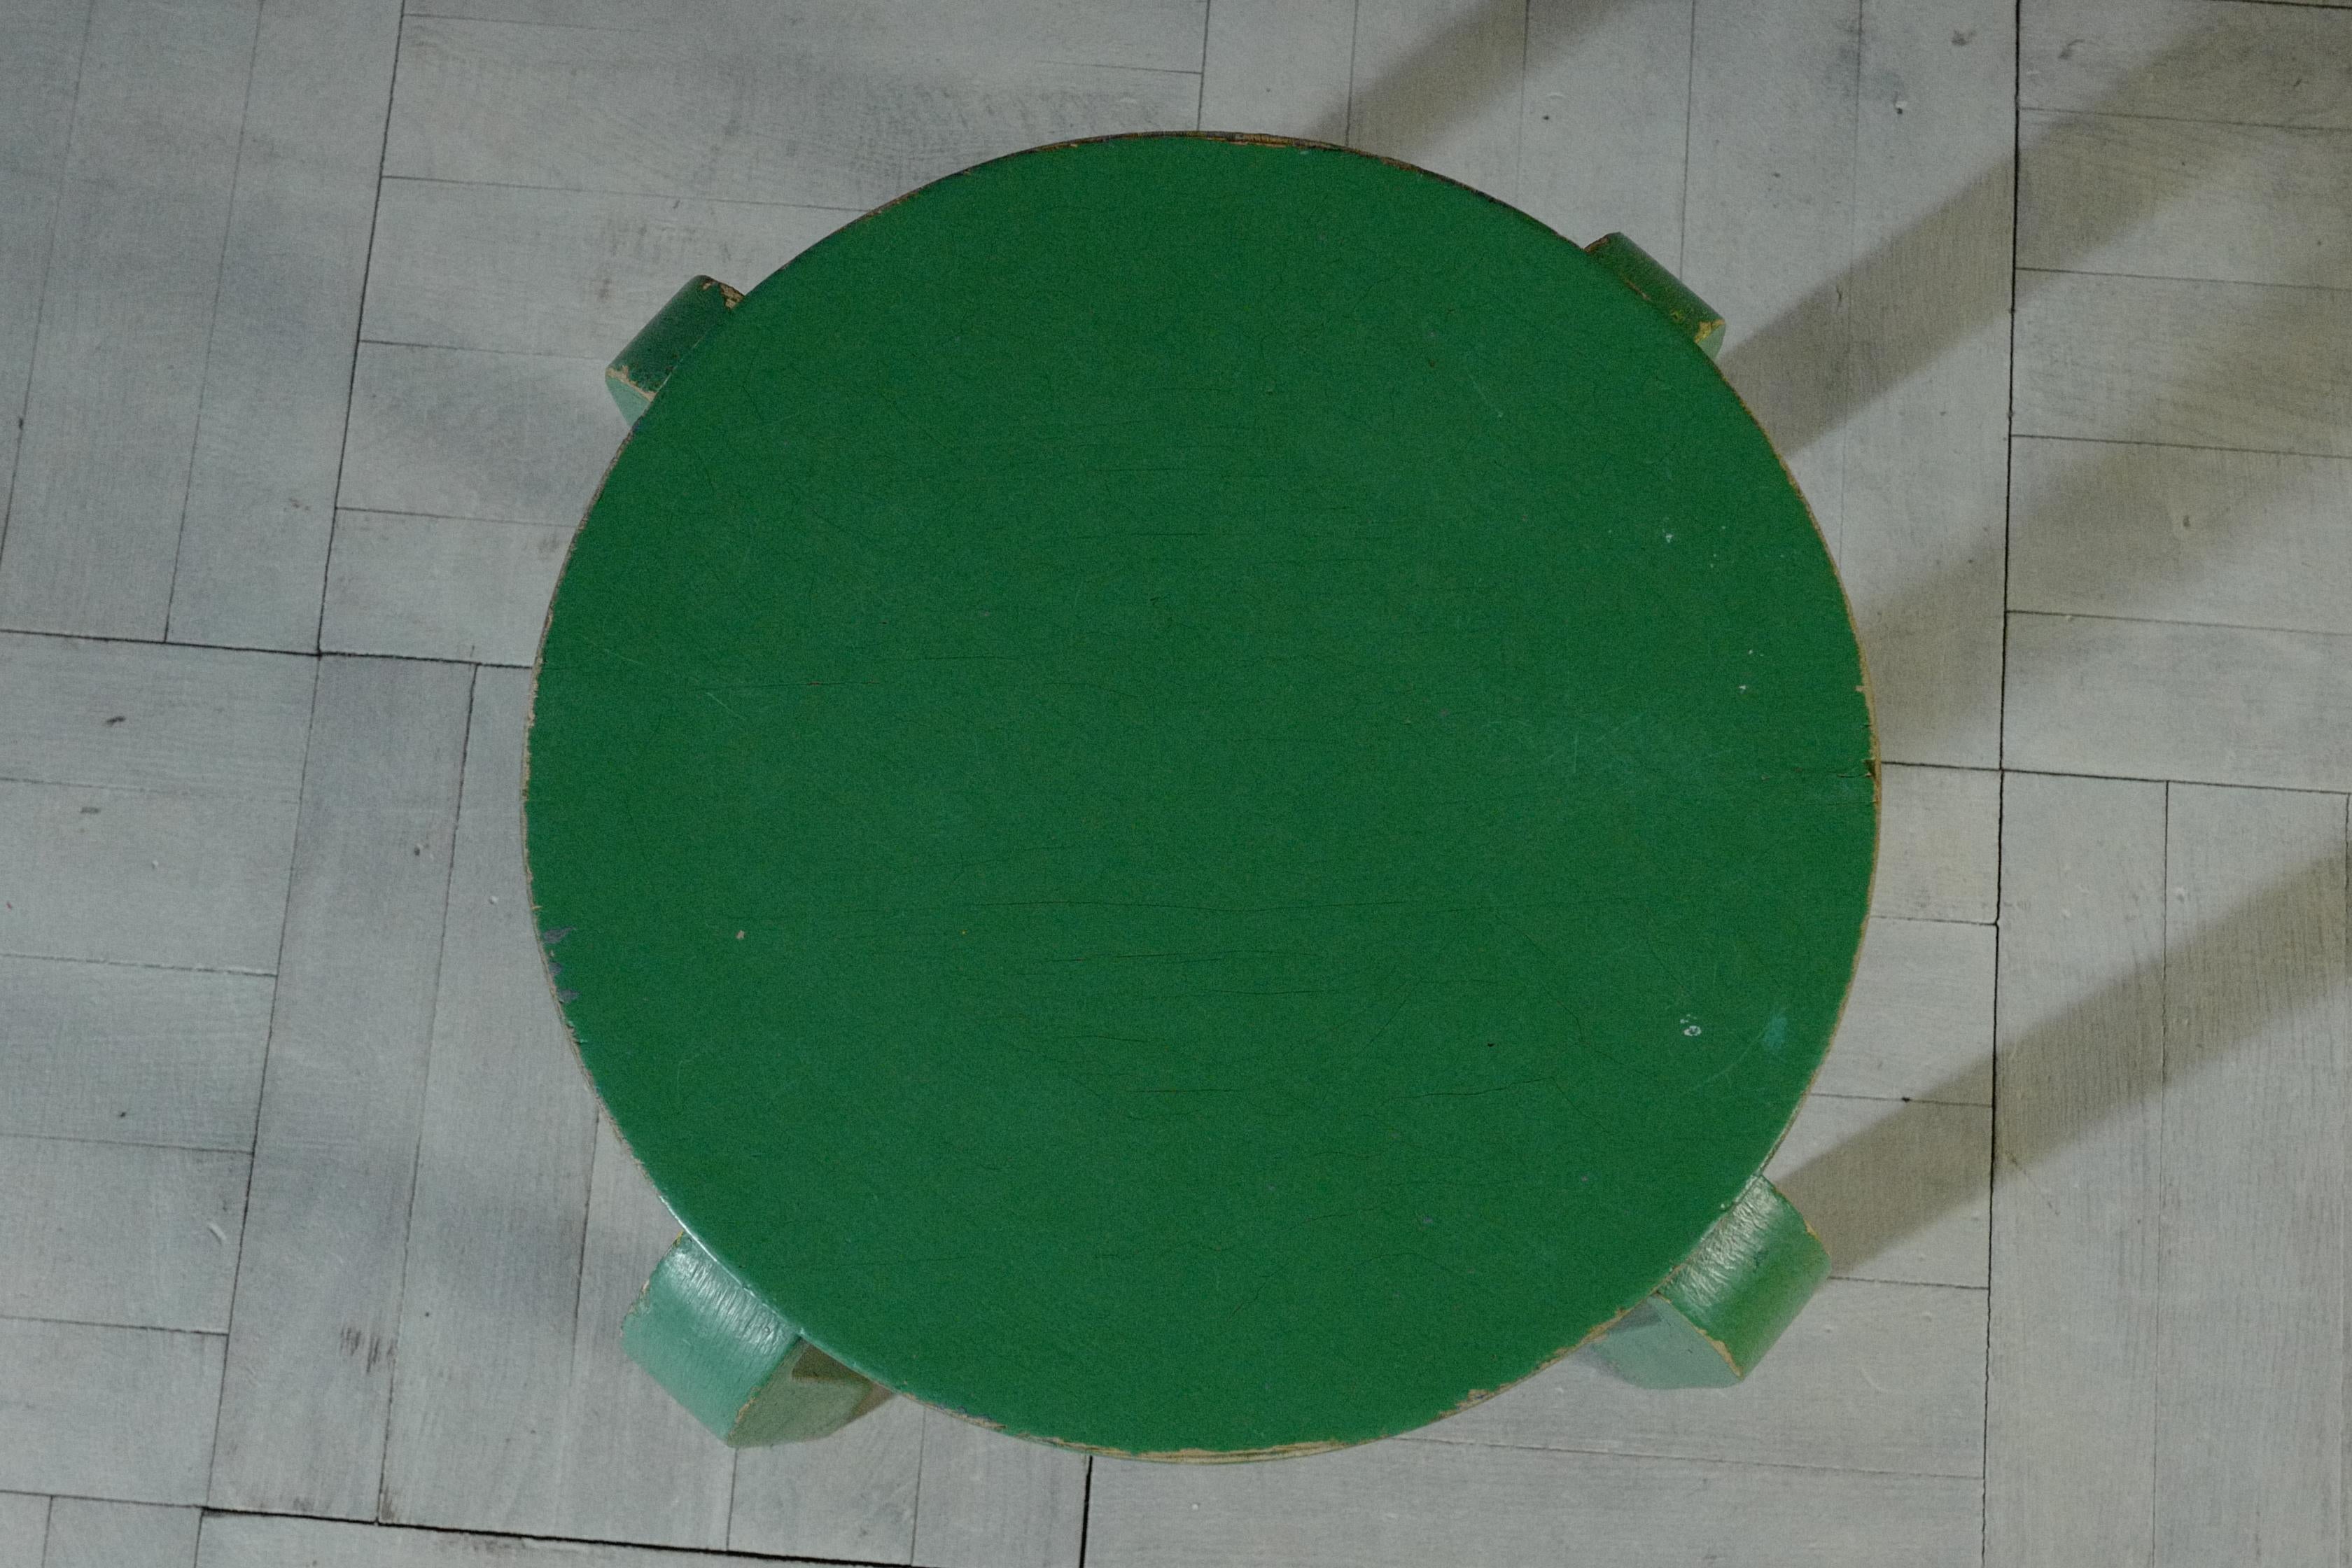 Modern alvar aalto stoolE60 kids size painted green 1960's For Sale